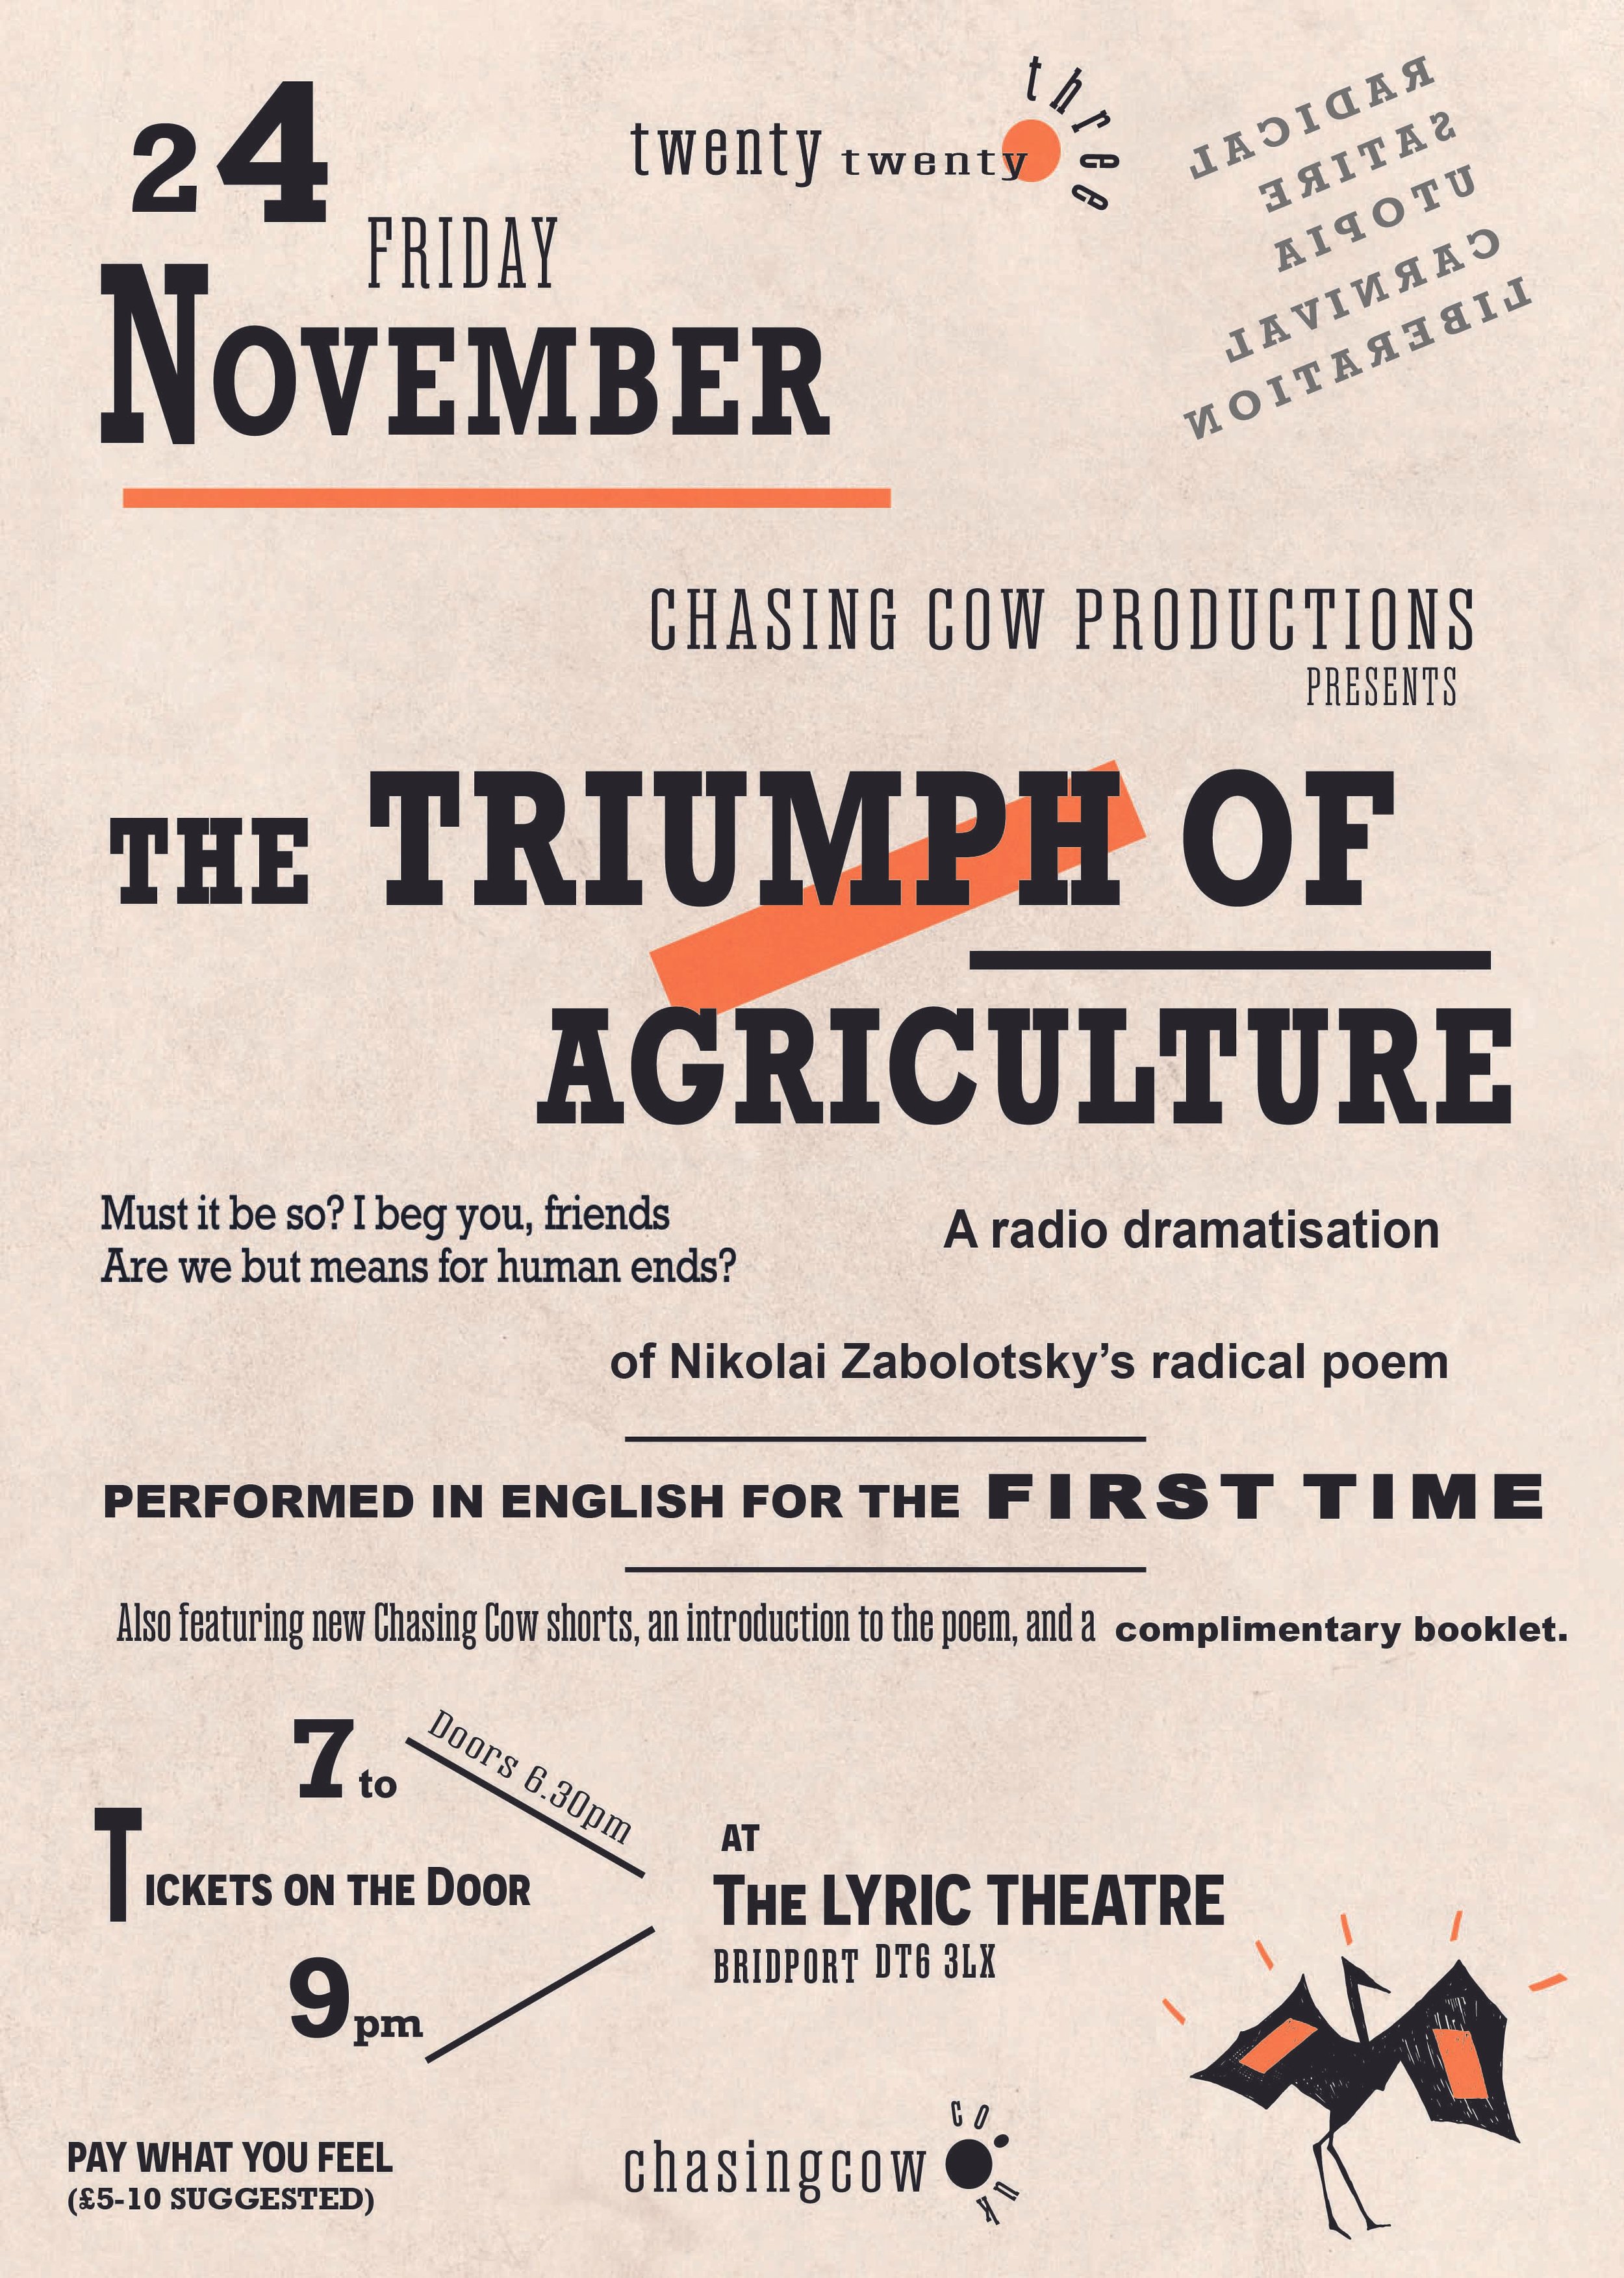 Triumph of Agriculture Event Poster lower res.jpg